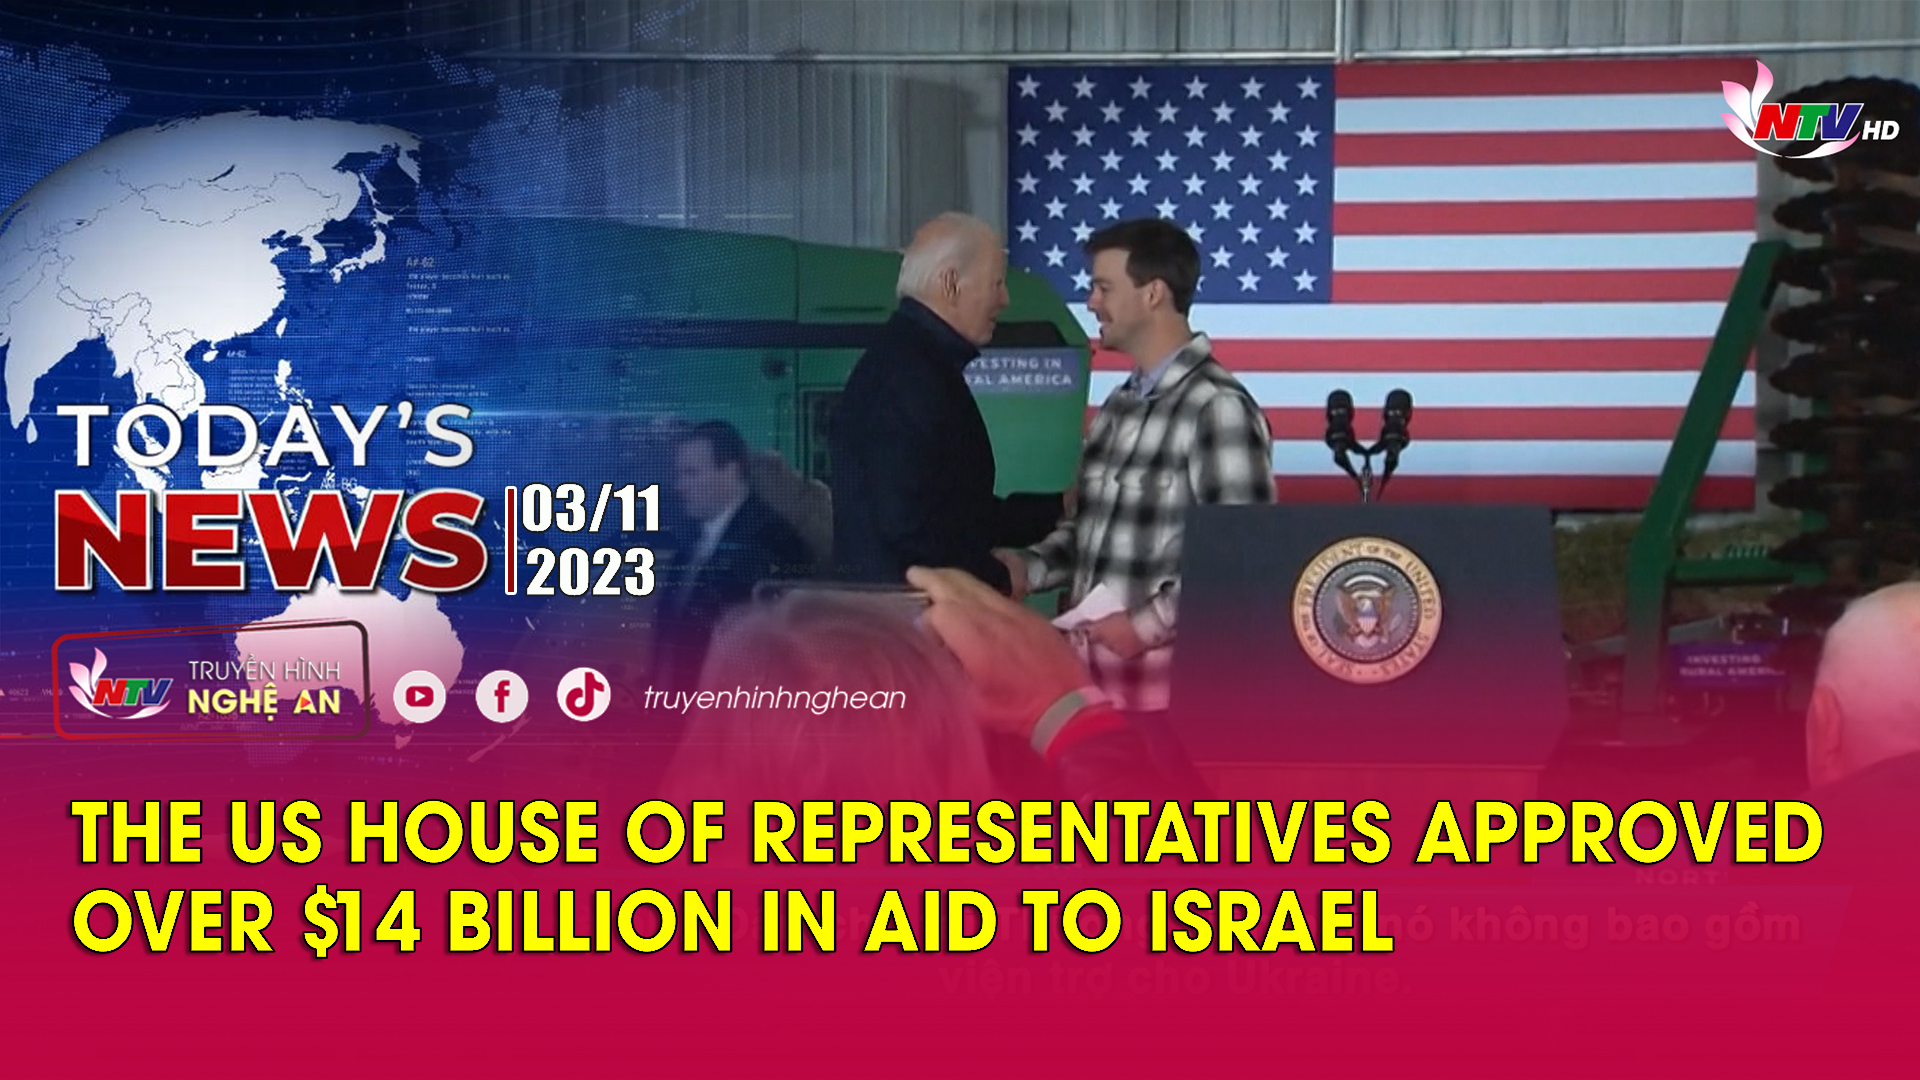 Today's News - 03/11/2023: The US House of Representatives approved over $14 billion in aid to Israel